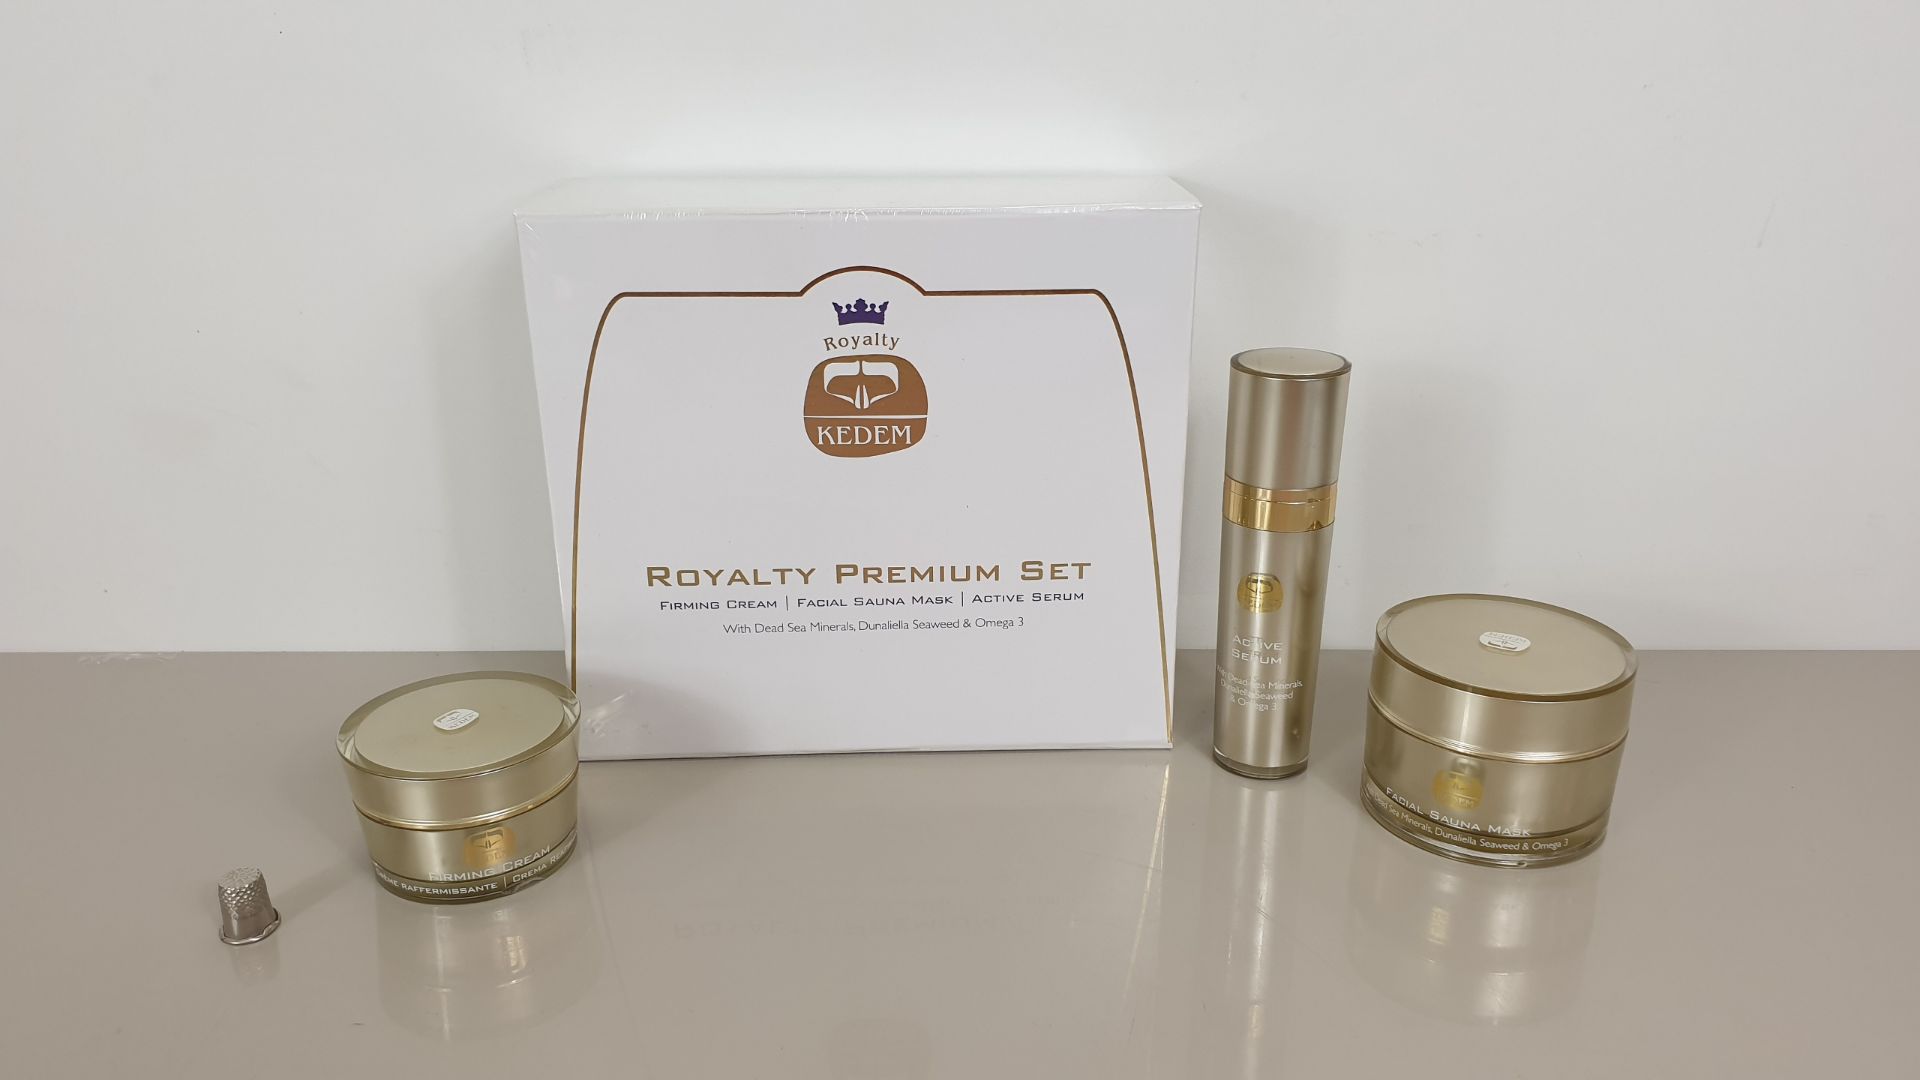 BRAND NEW BOXED KEDEM ROYALTY PREMIUM SET INCLUDES FIRMING CREAM, FACIAL SAUNA MASK AND ACTIVE SERUM